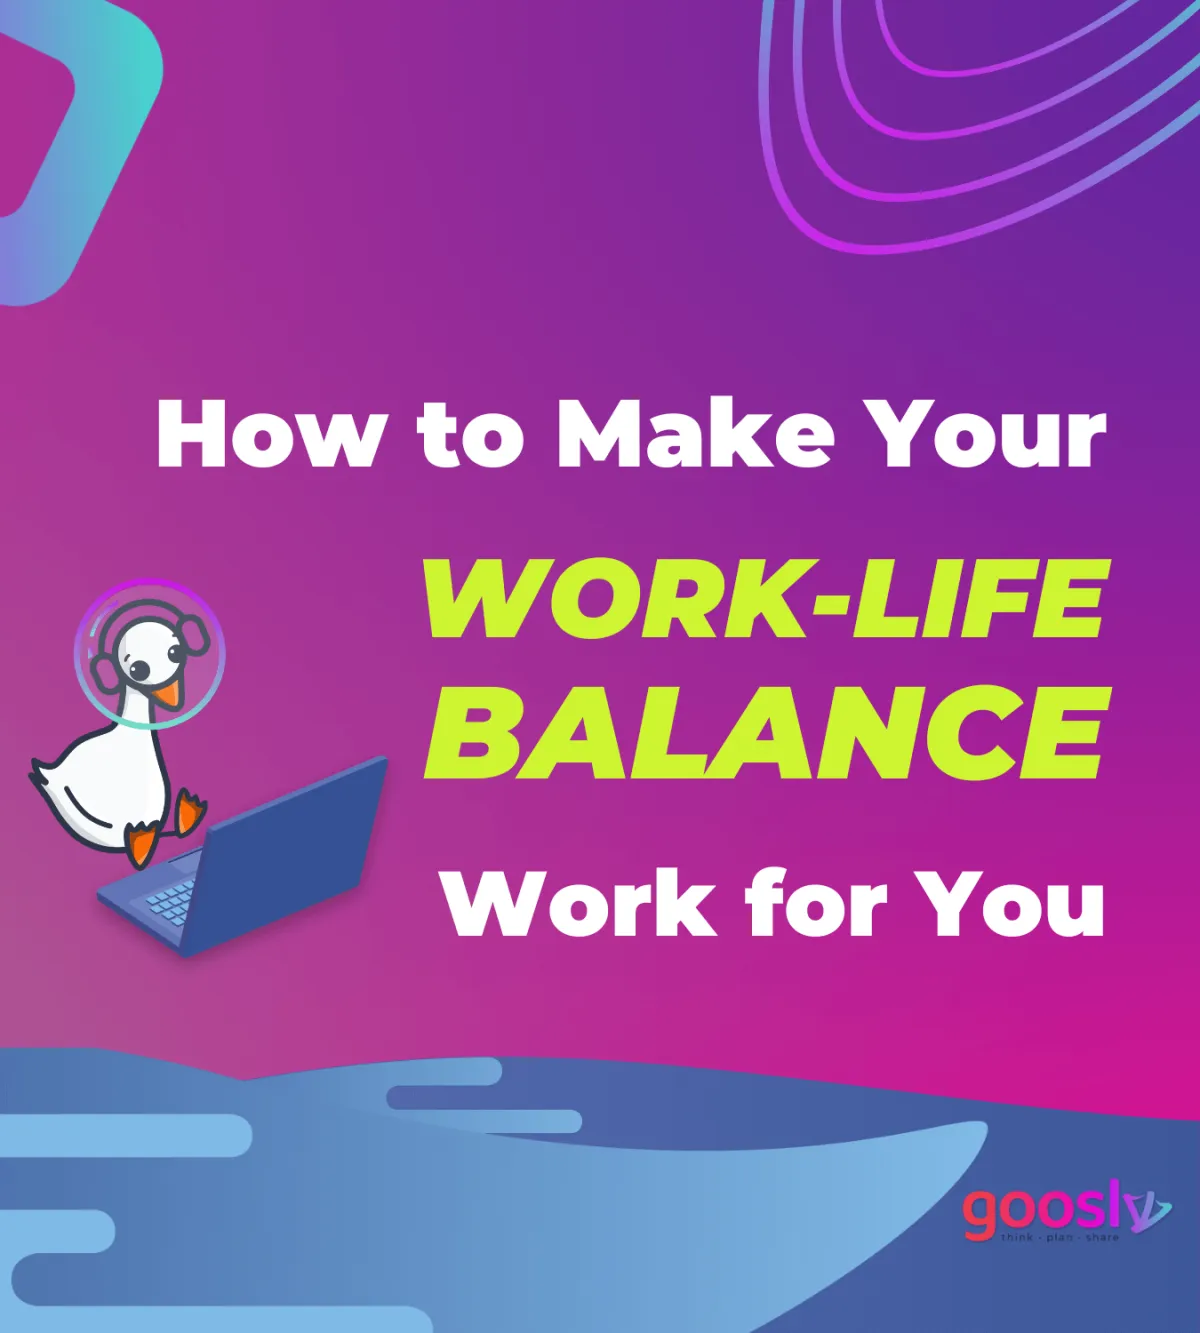 How To Make Your Work-Life Balance Work for You - Goosly blog